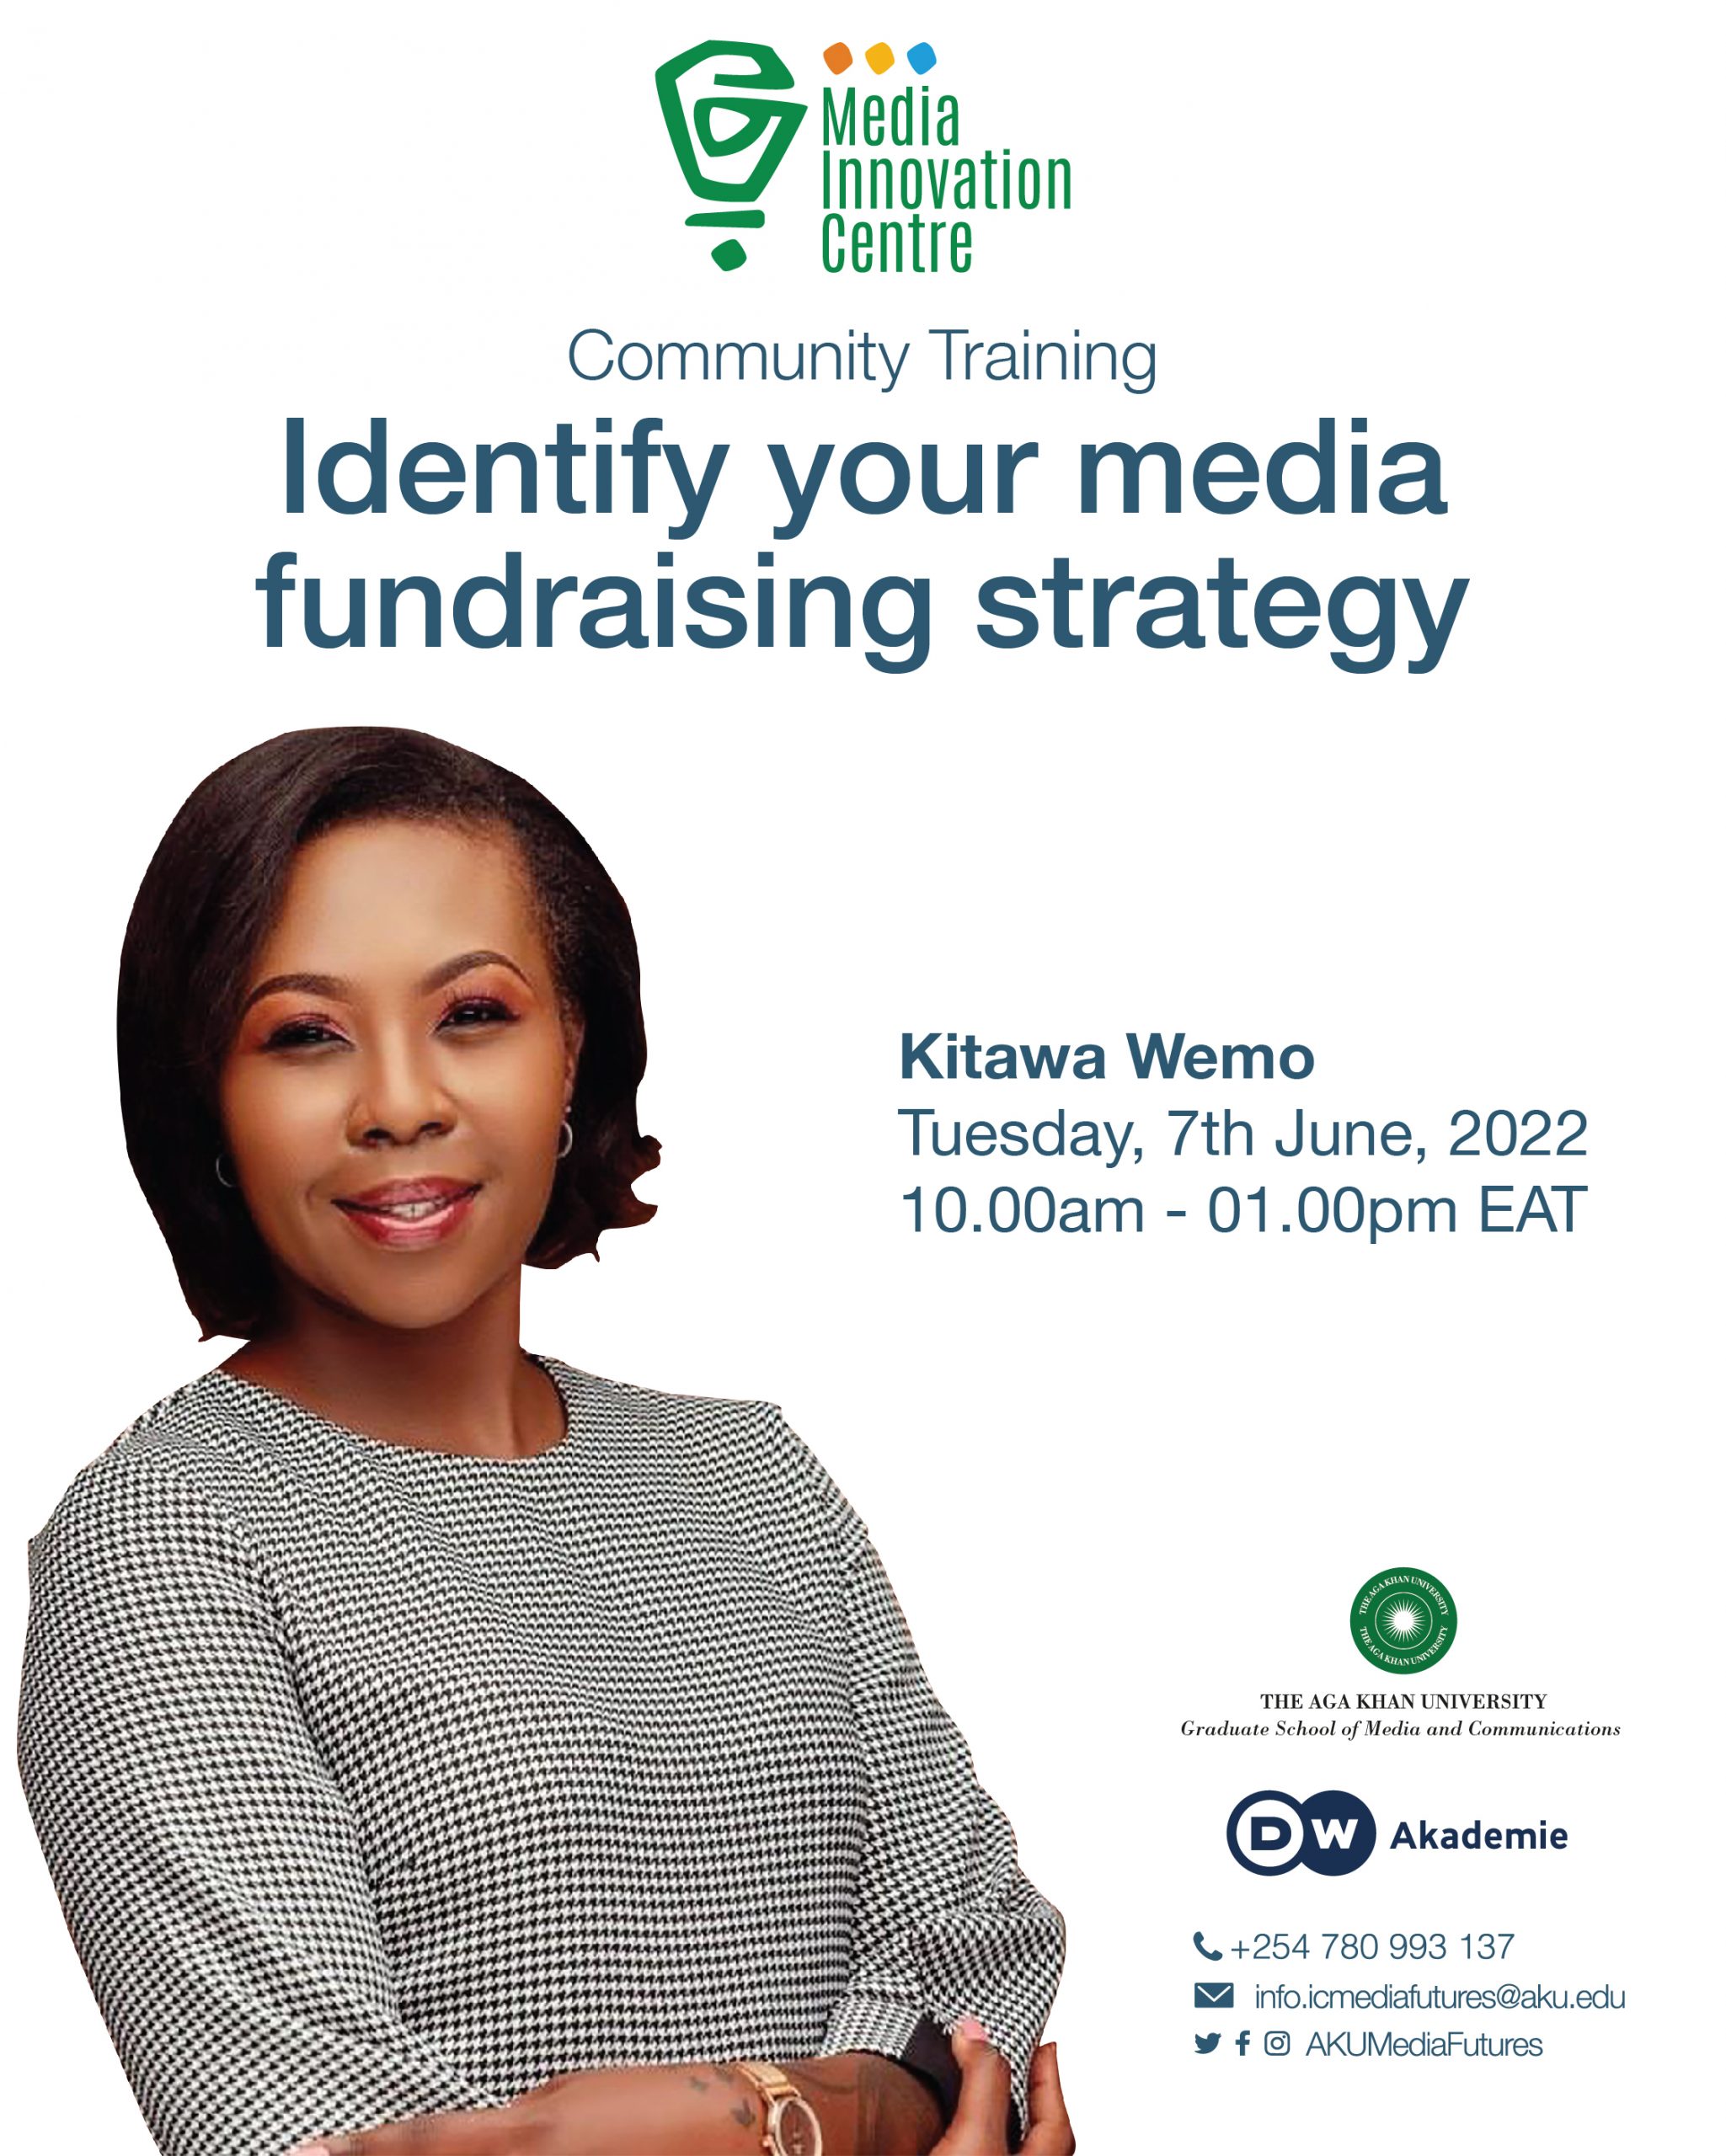  Identify your media fundraising strategy